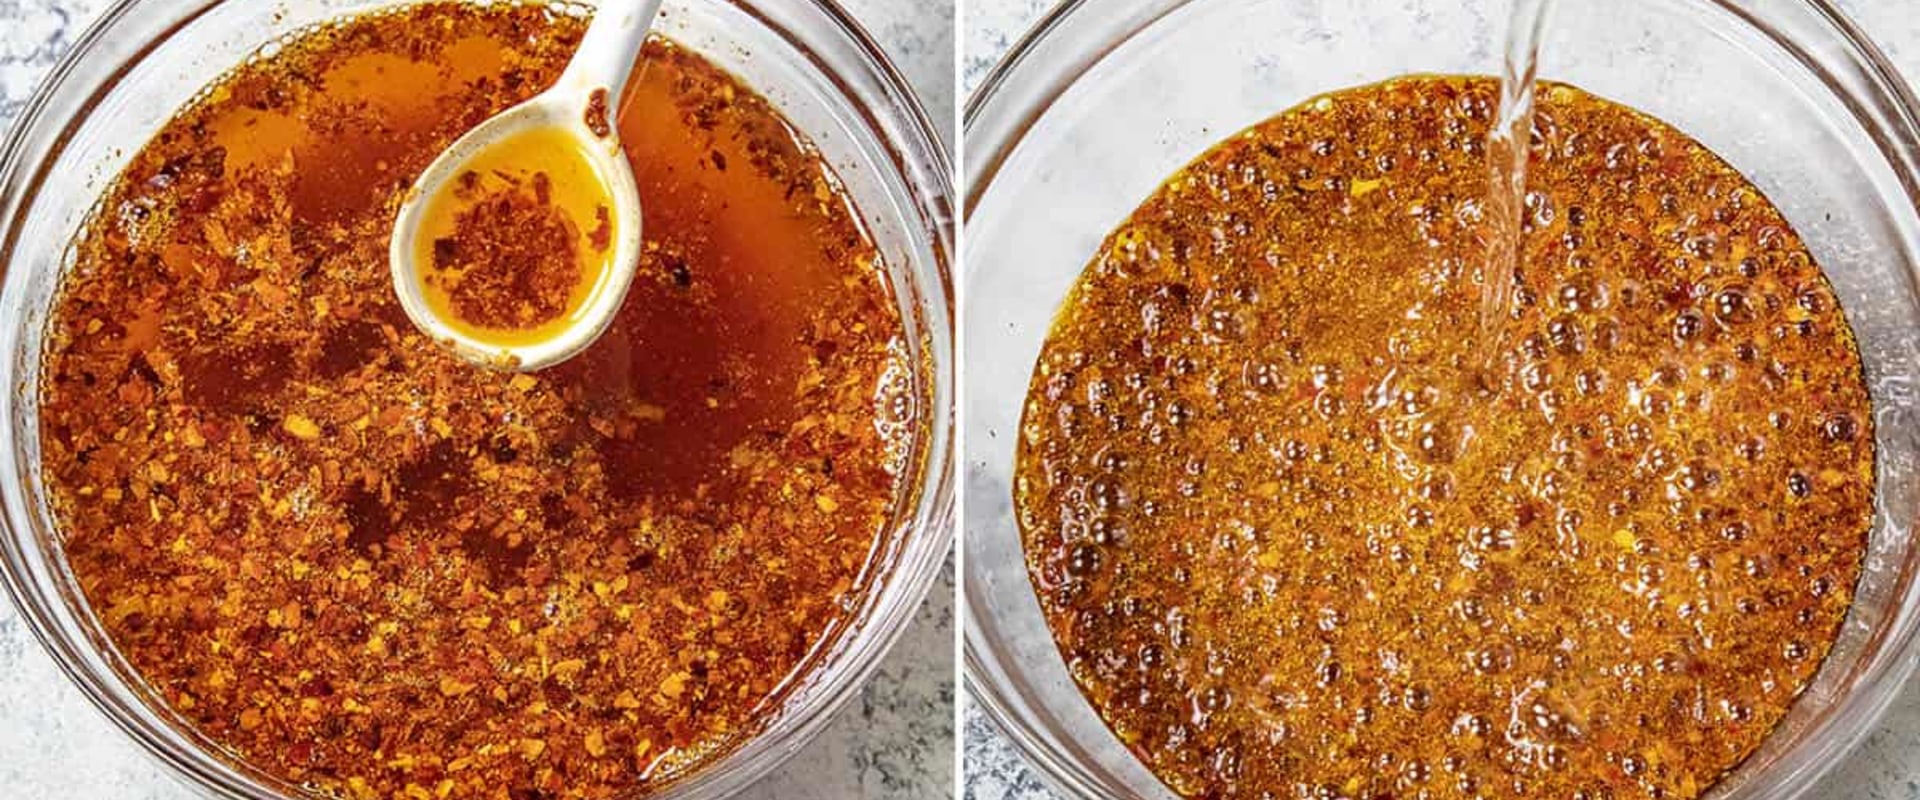 Infusing Peppers into Oil or Vinegar - A Spicy Sauces Guide